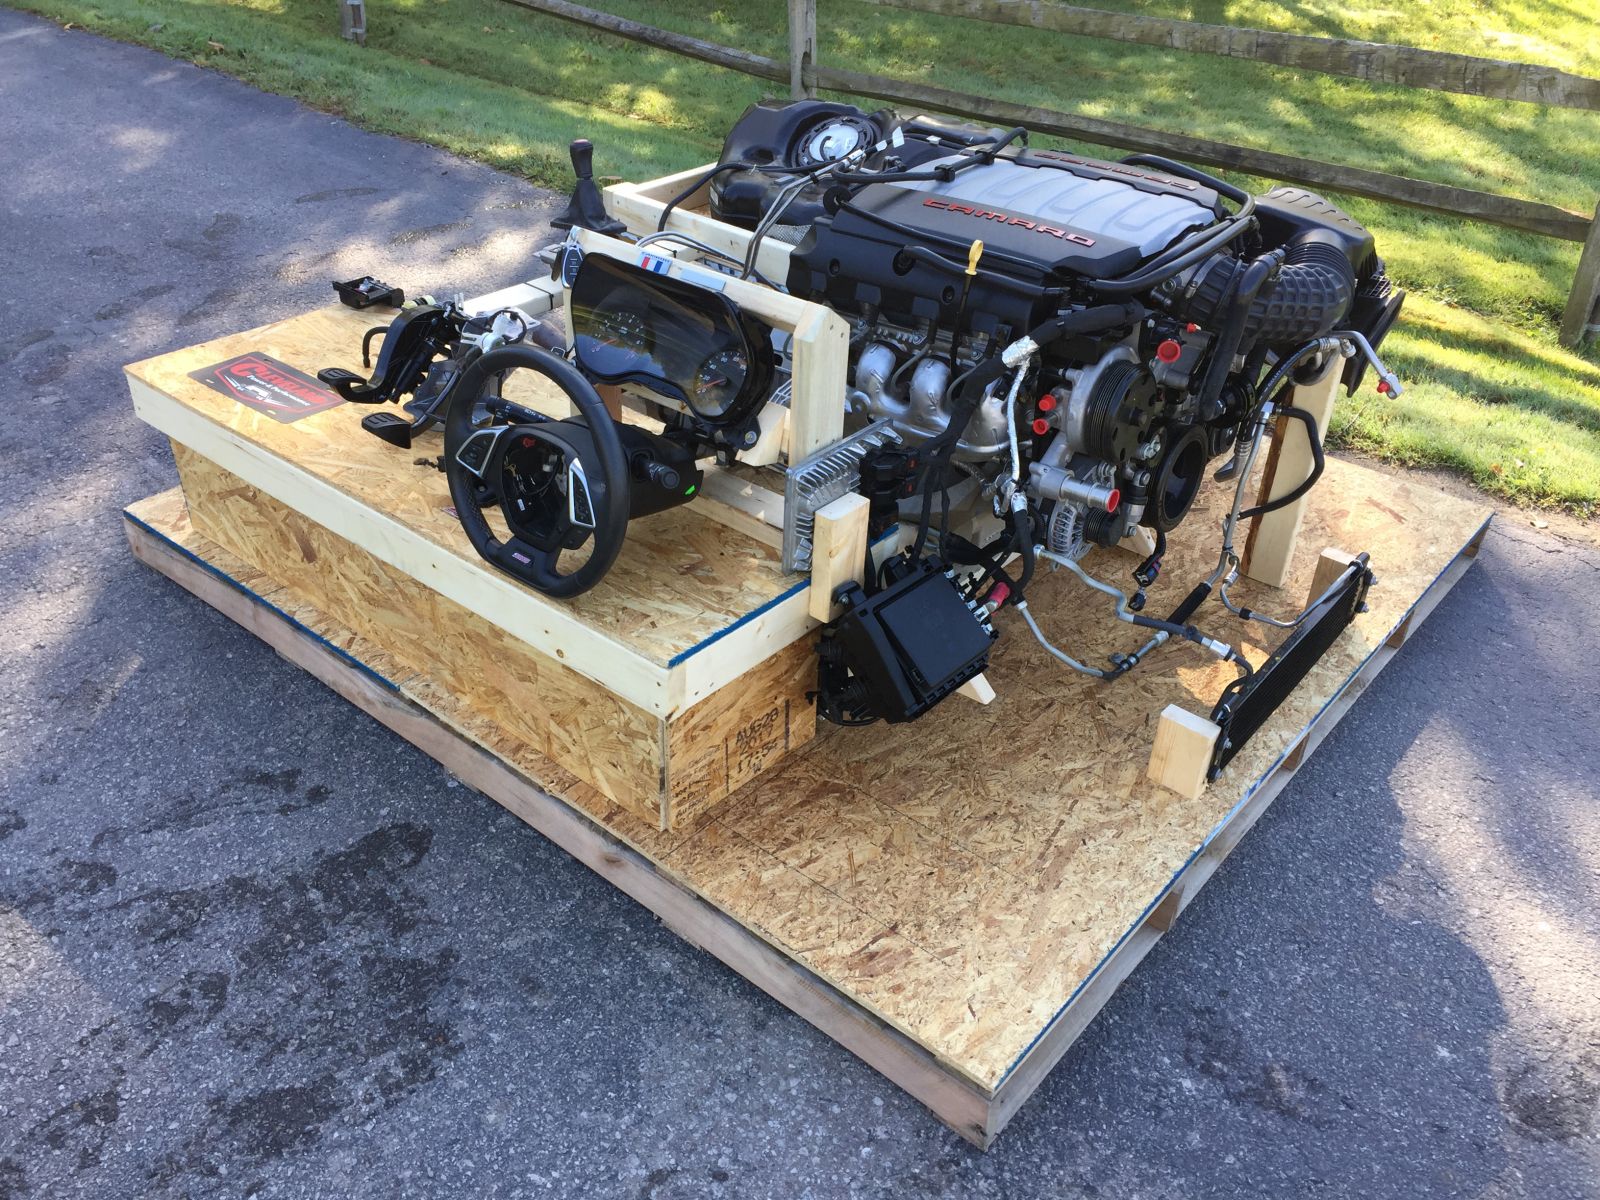 Your LT1 Dream Swap is Running and Waiting on a Pallet - LS1Tech.com